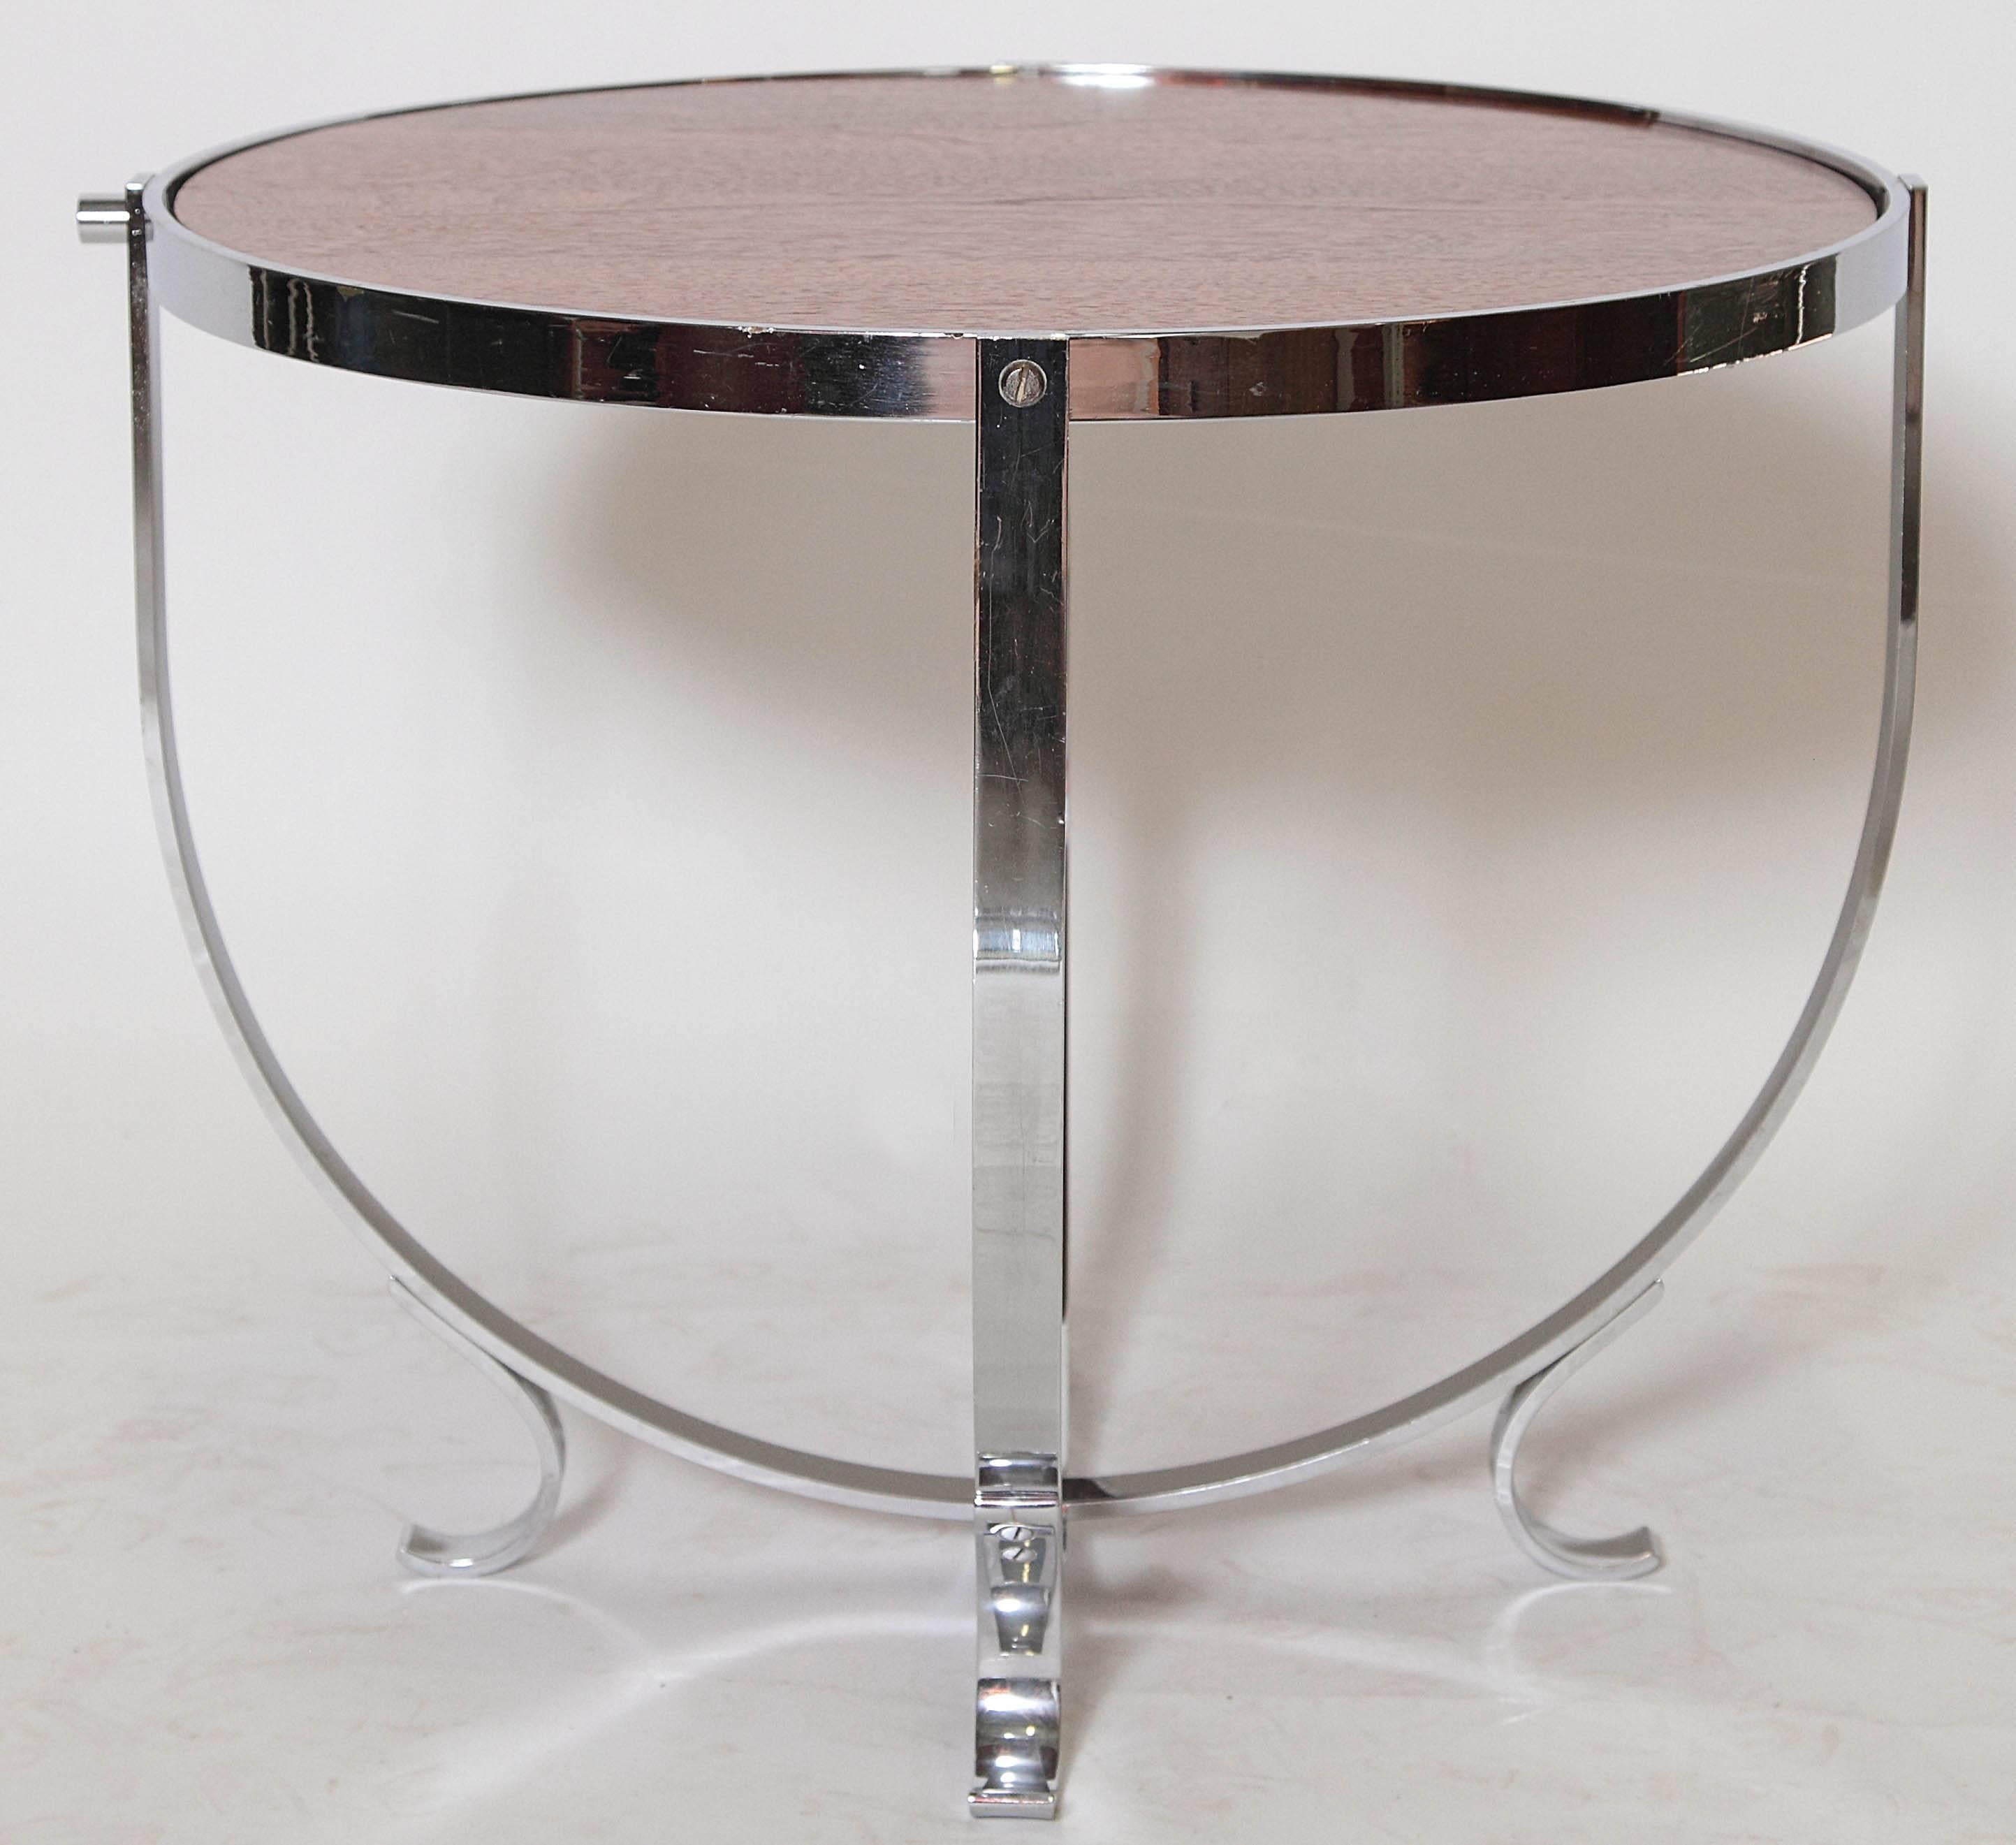 American Machine Age Art Deco Streamline Cruise Liner or Pullman Car Cocktail Table For Sale